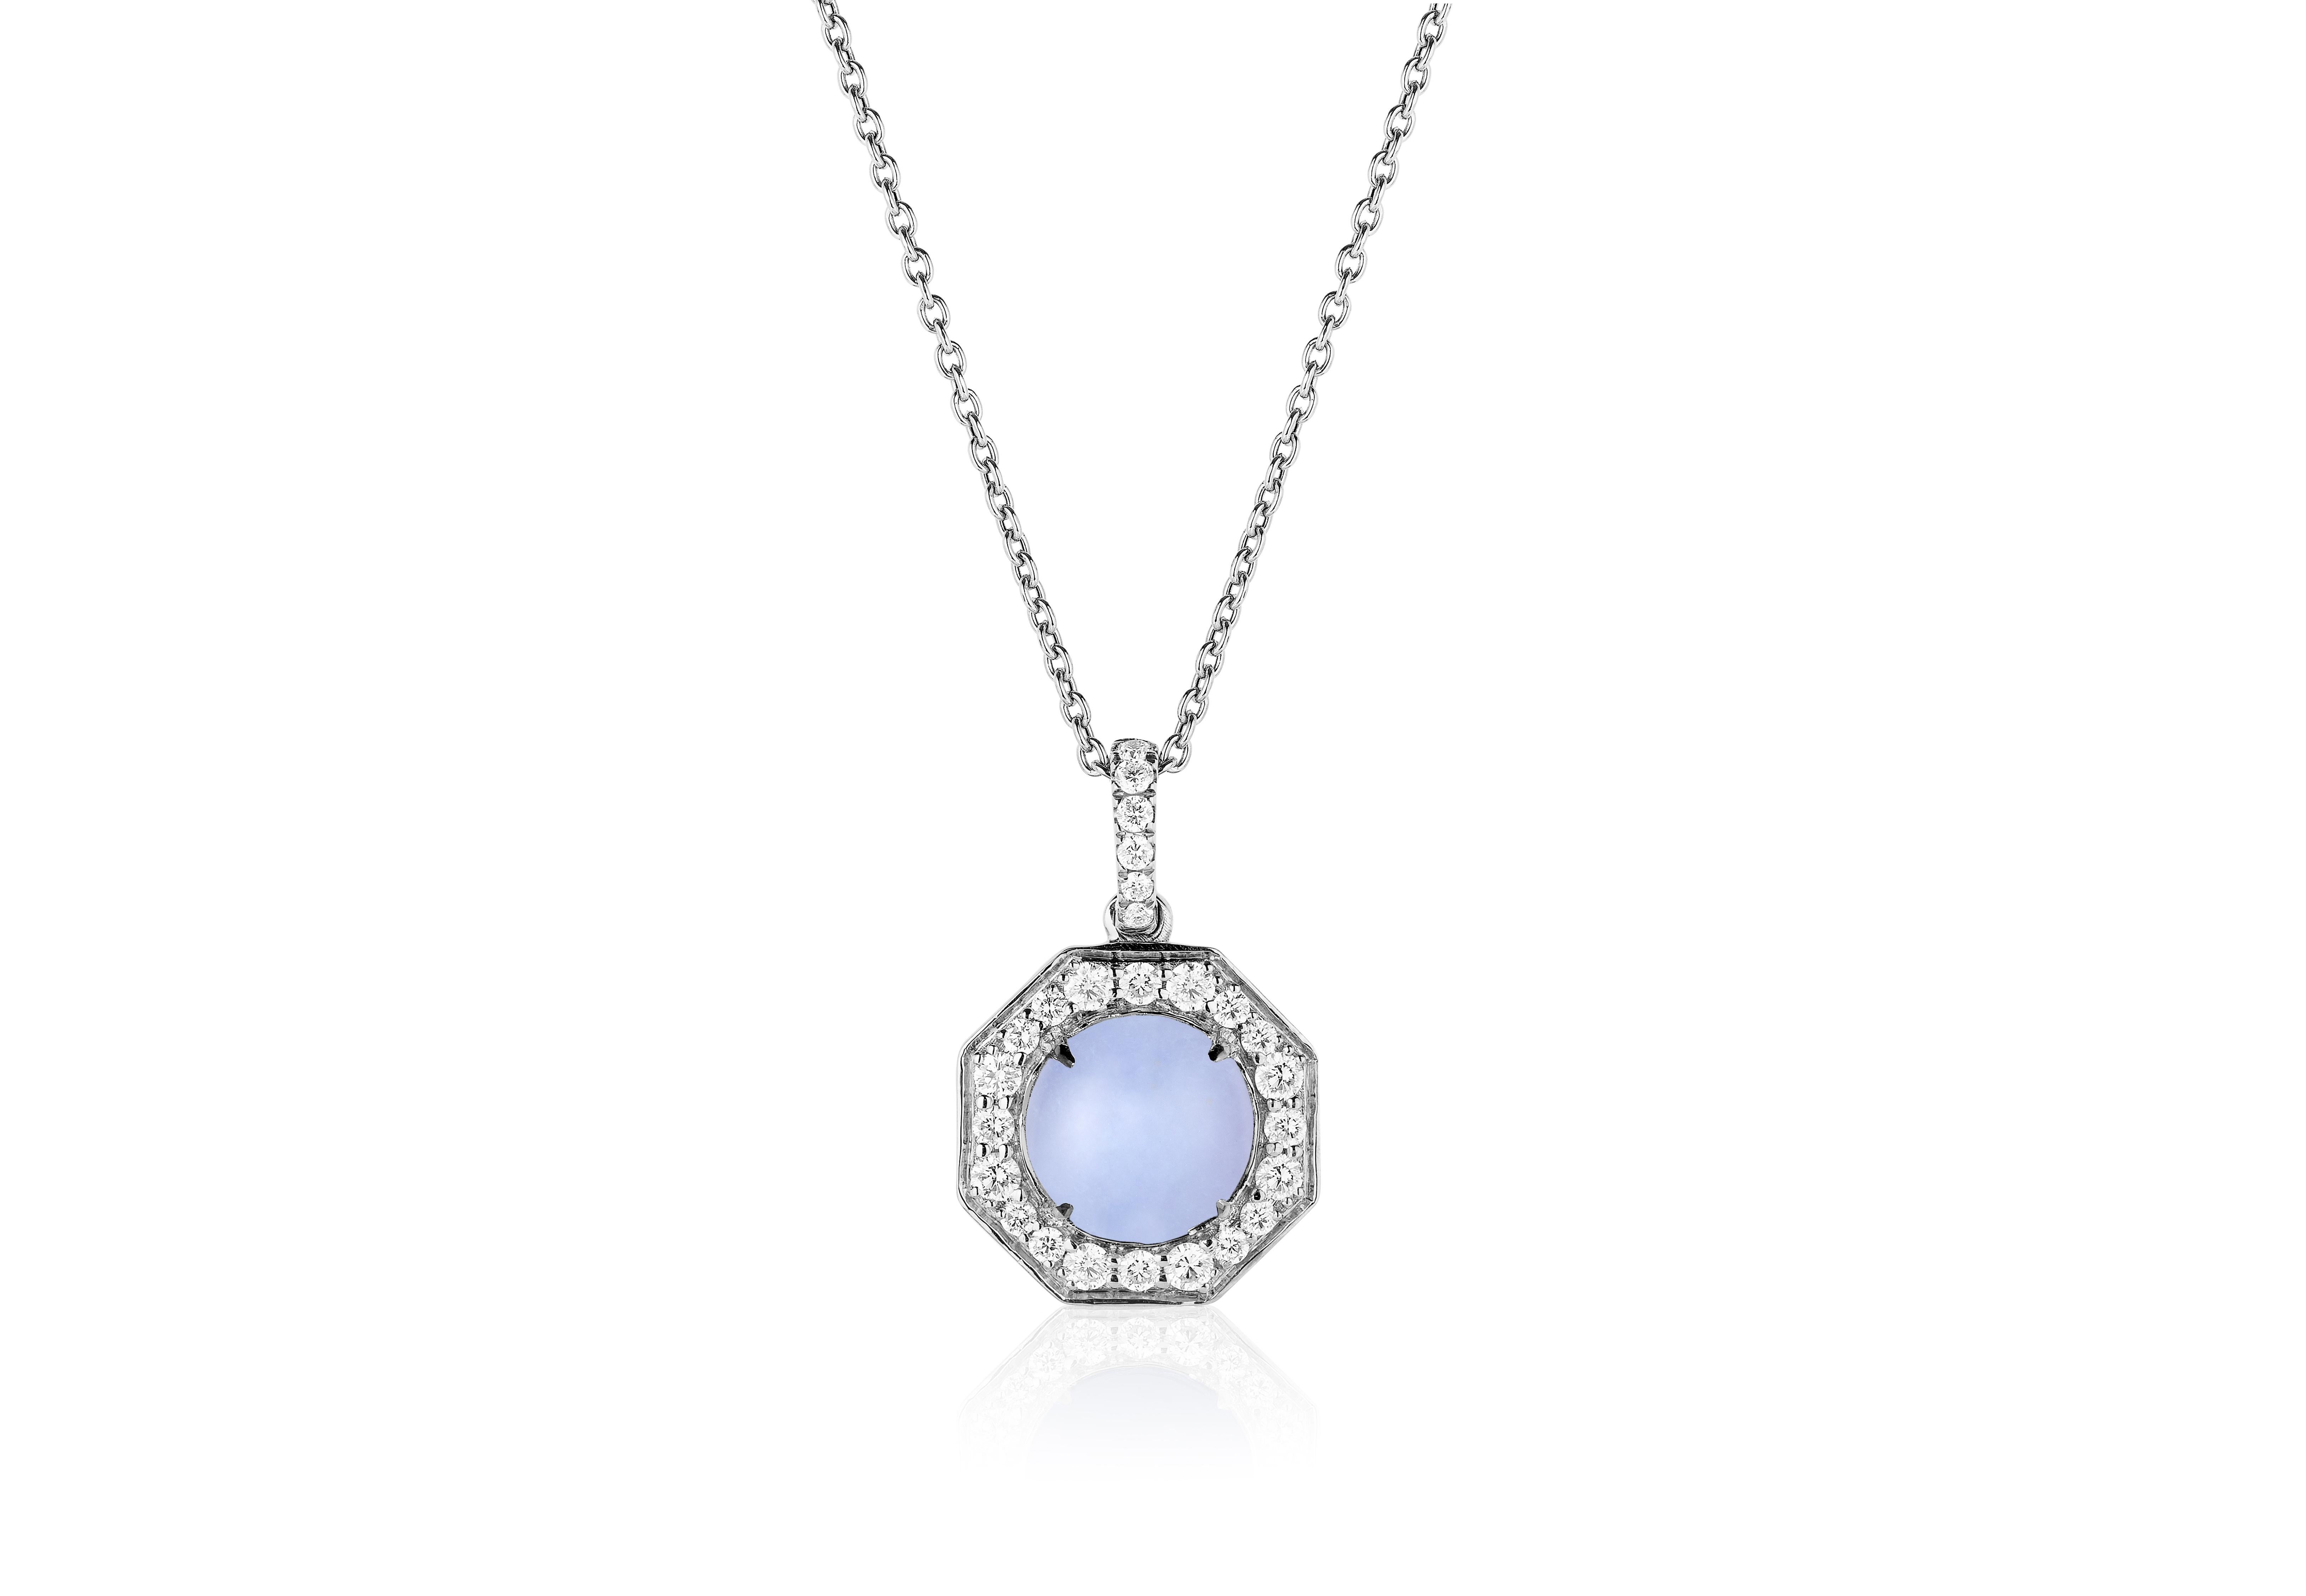 Blue Chalcedony Small Pendant With Diamond in 18k White Gold and Black Rhodium, from 'Rock N Roll' Collection

Stone Size-8 mm

Gemstone Weight:  1.25 Carats

Diamond: G-H / VS. Approx Wt: 0.36 Carats